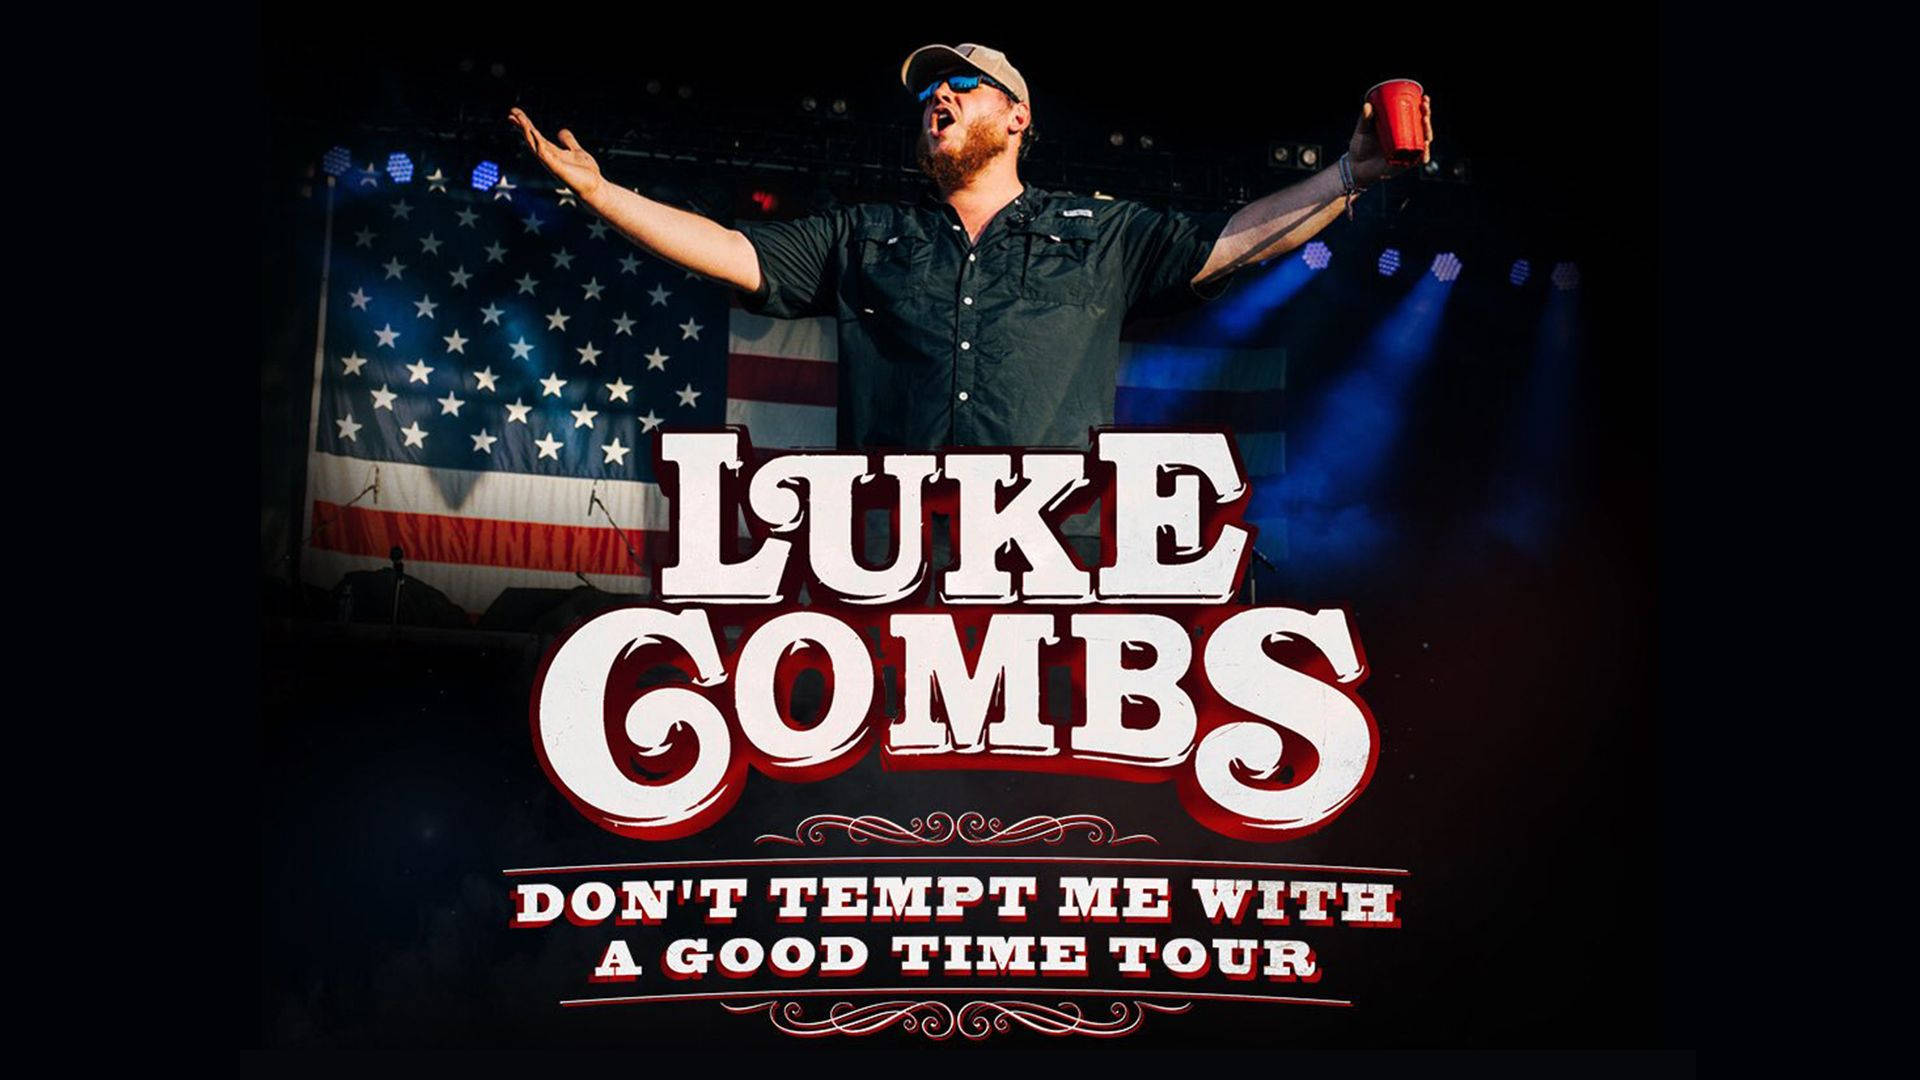 Luke Combs singing his heart out on a Nashville stage. Wallpaper